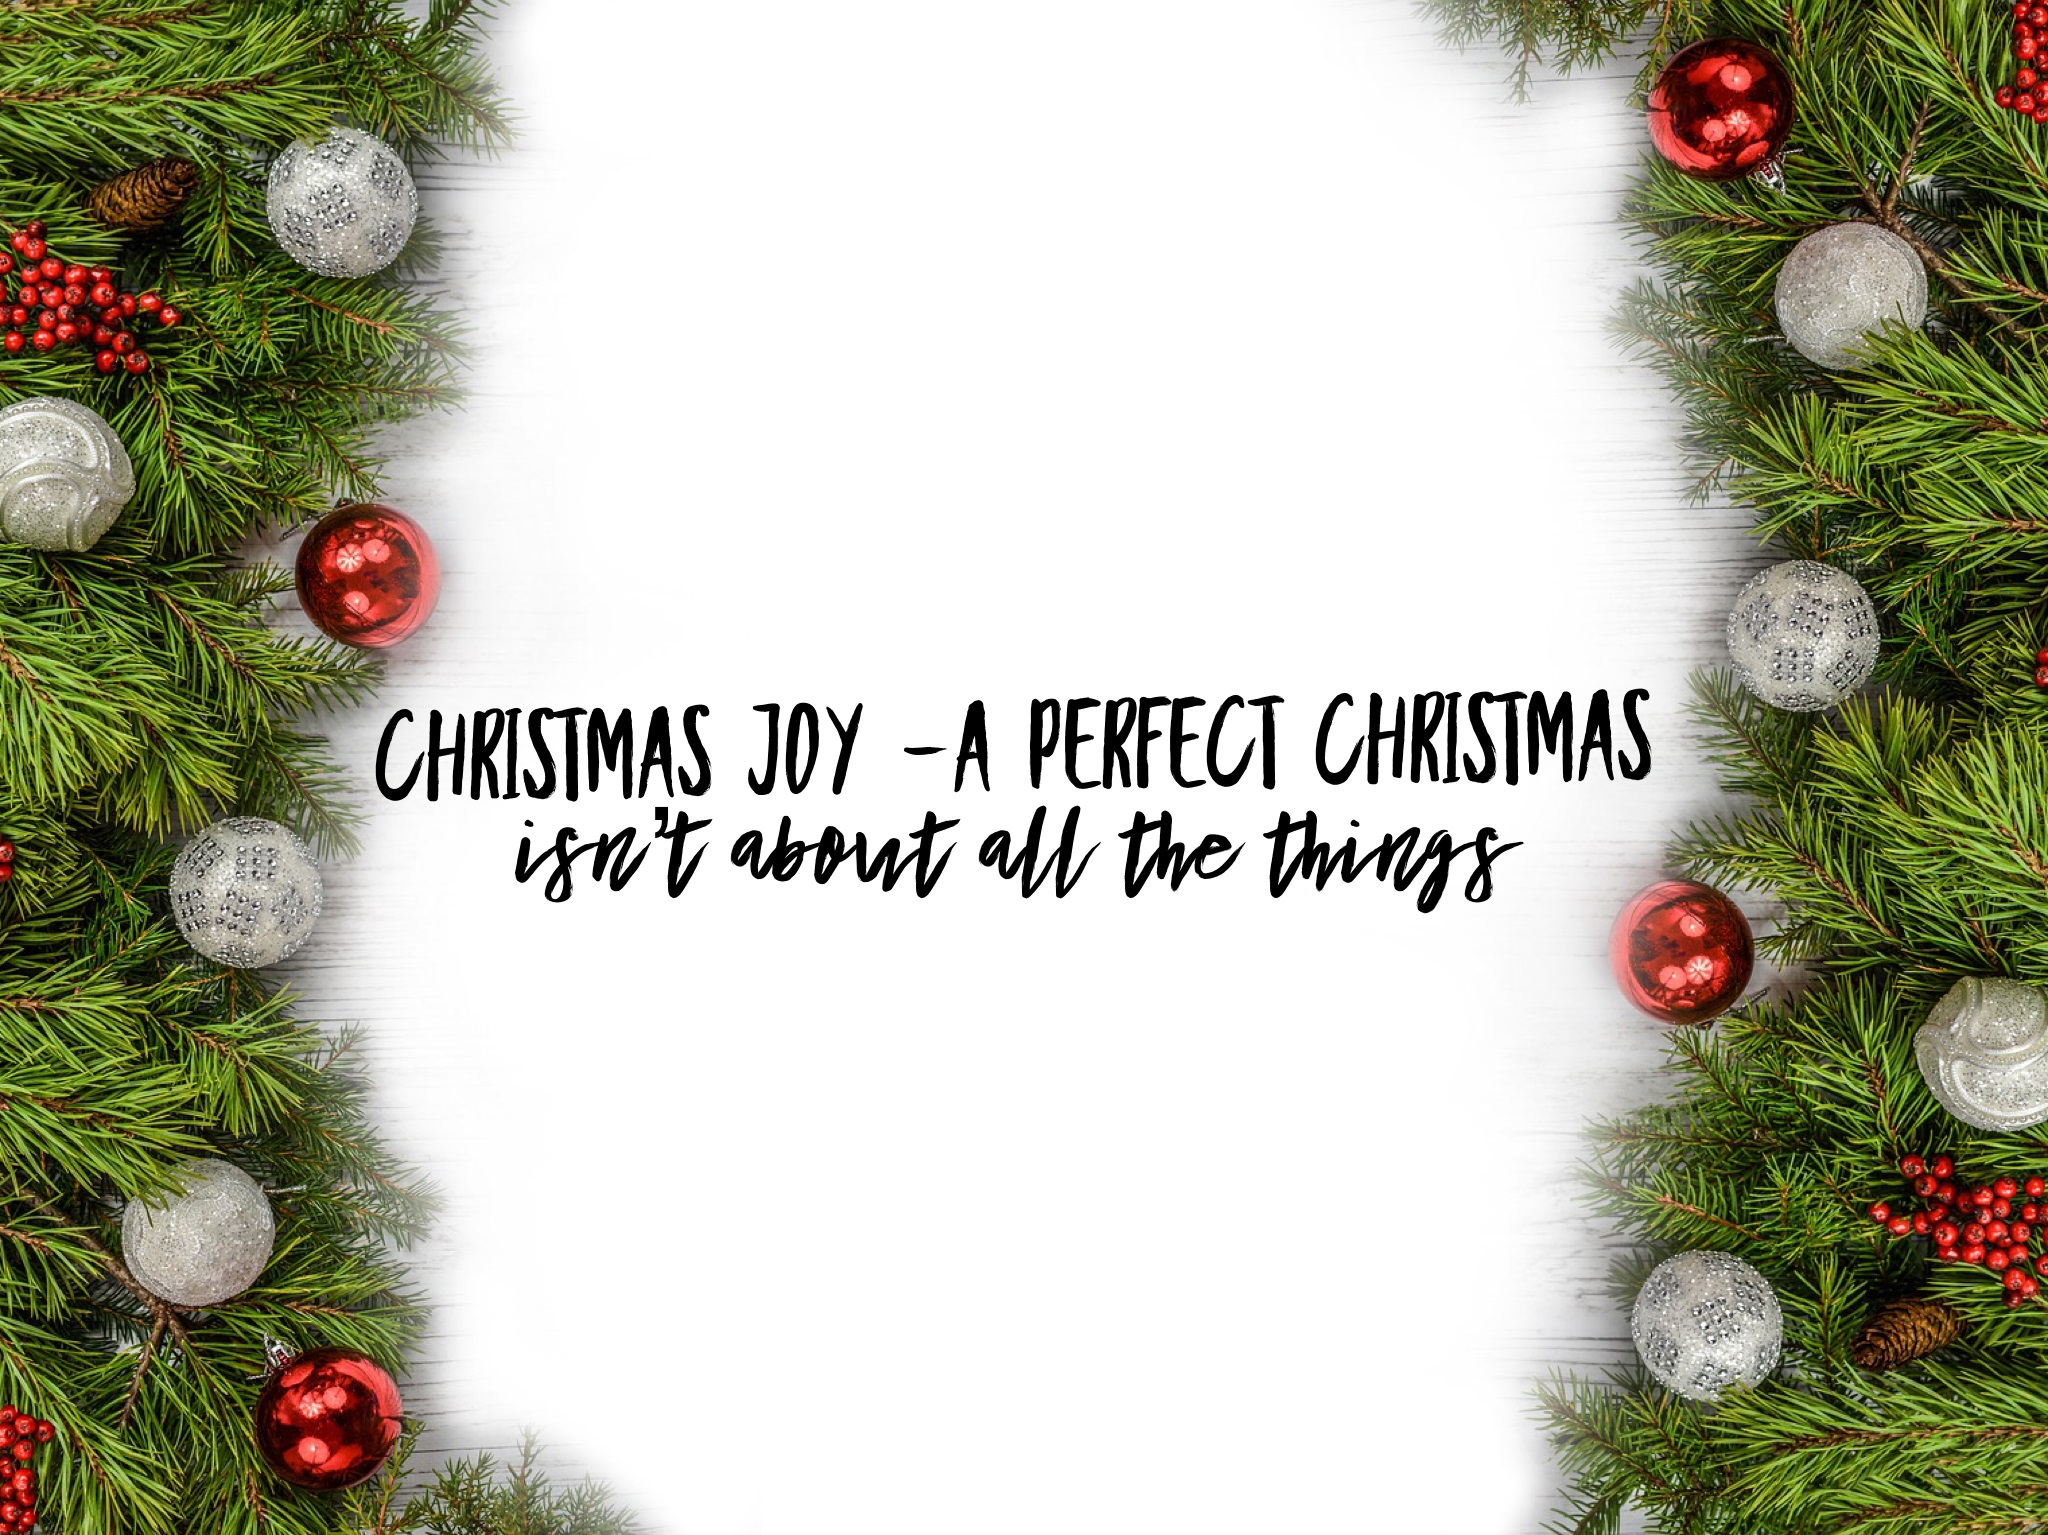 Christmas Joy-A Perfect Christmas Isn’t About All the Things